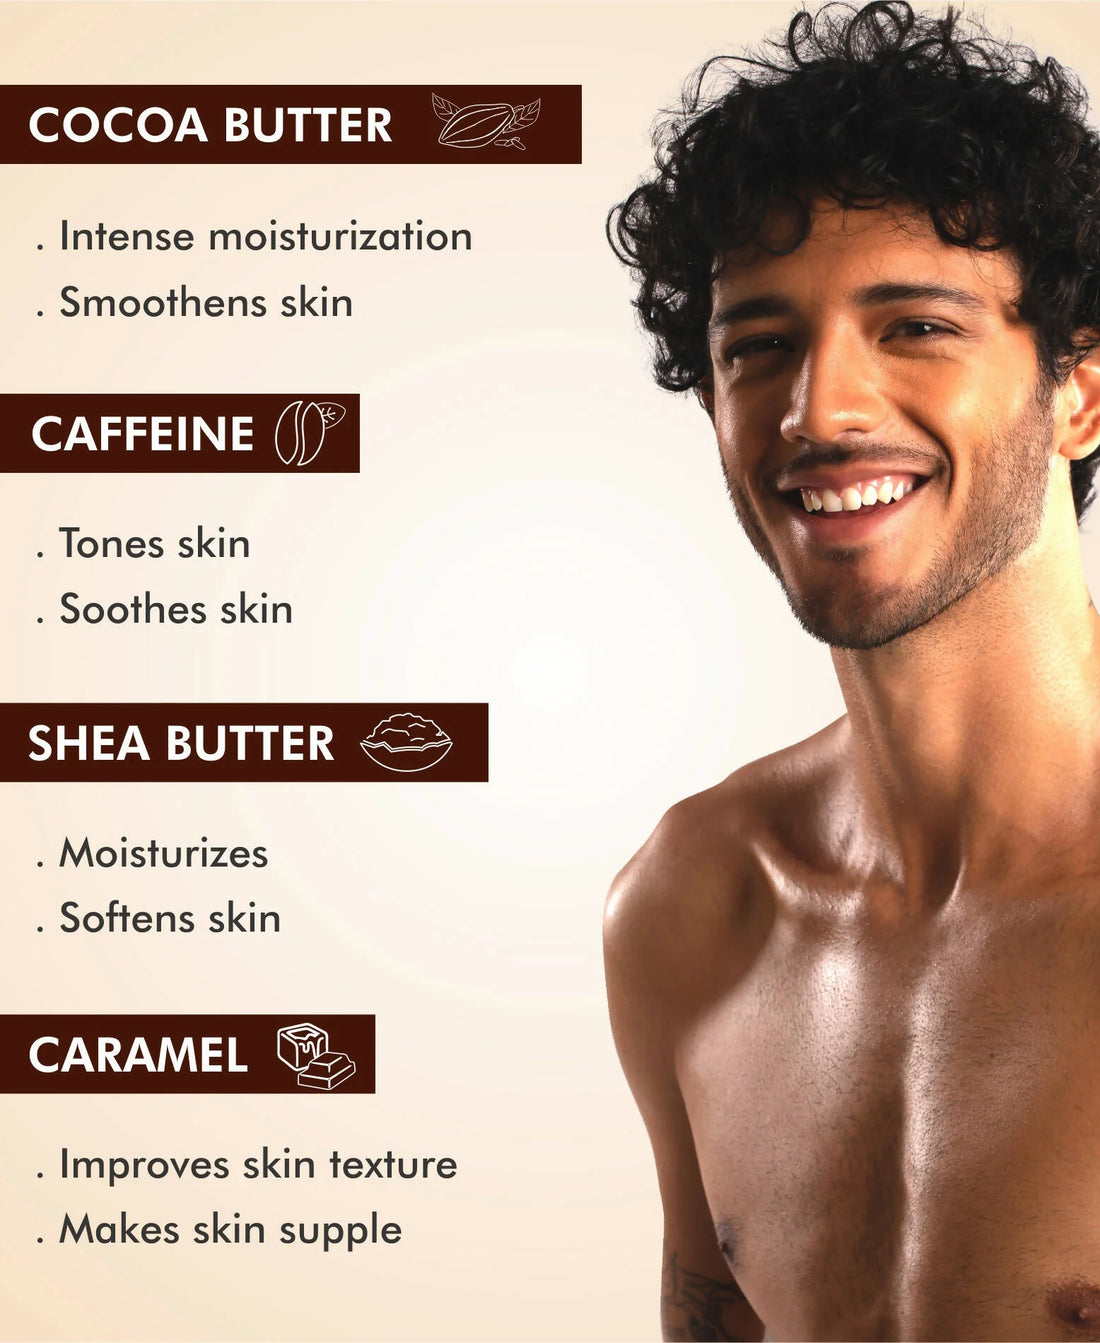 mCaffeine Naked and Rich Choco Body Lotion